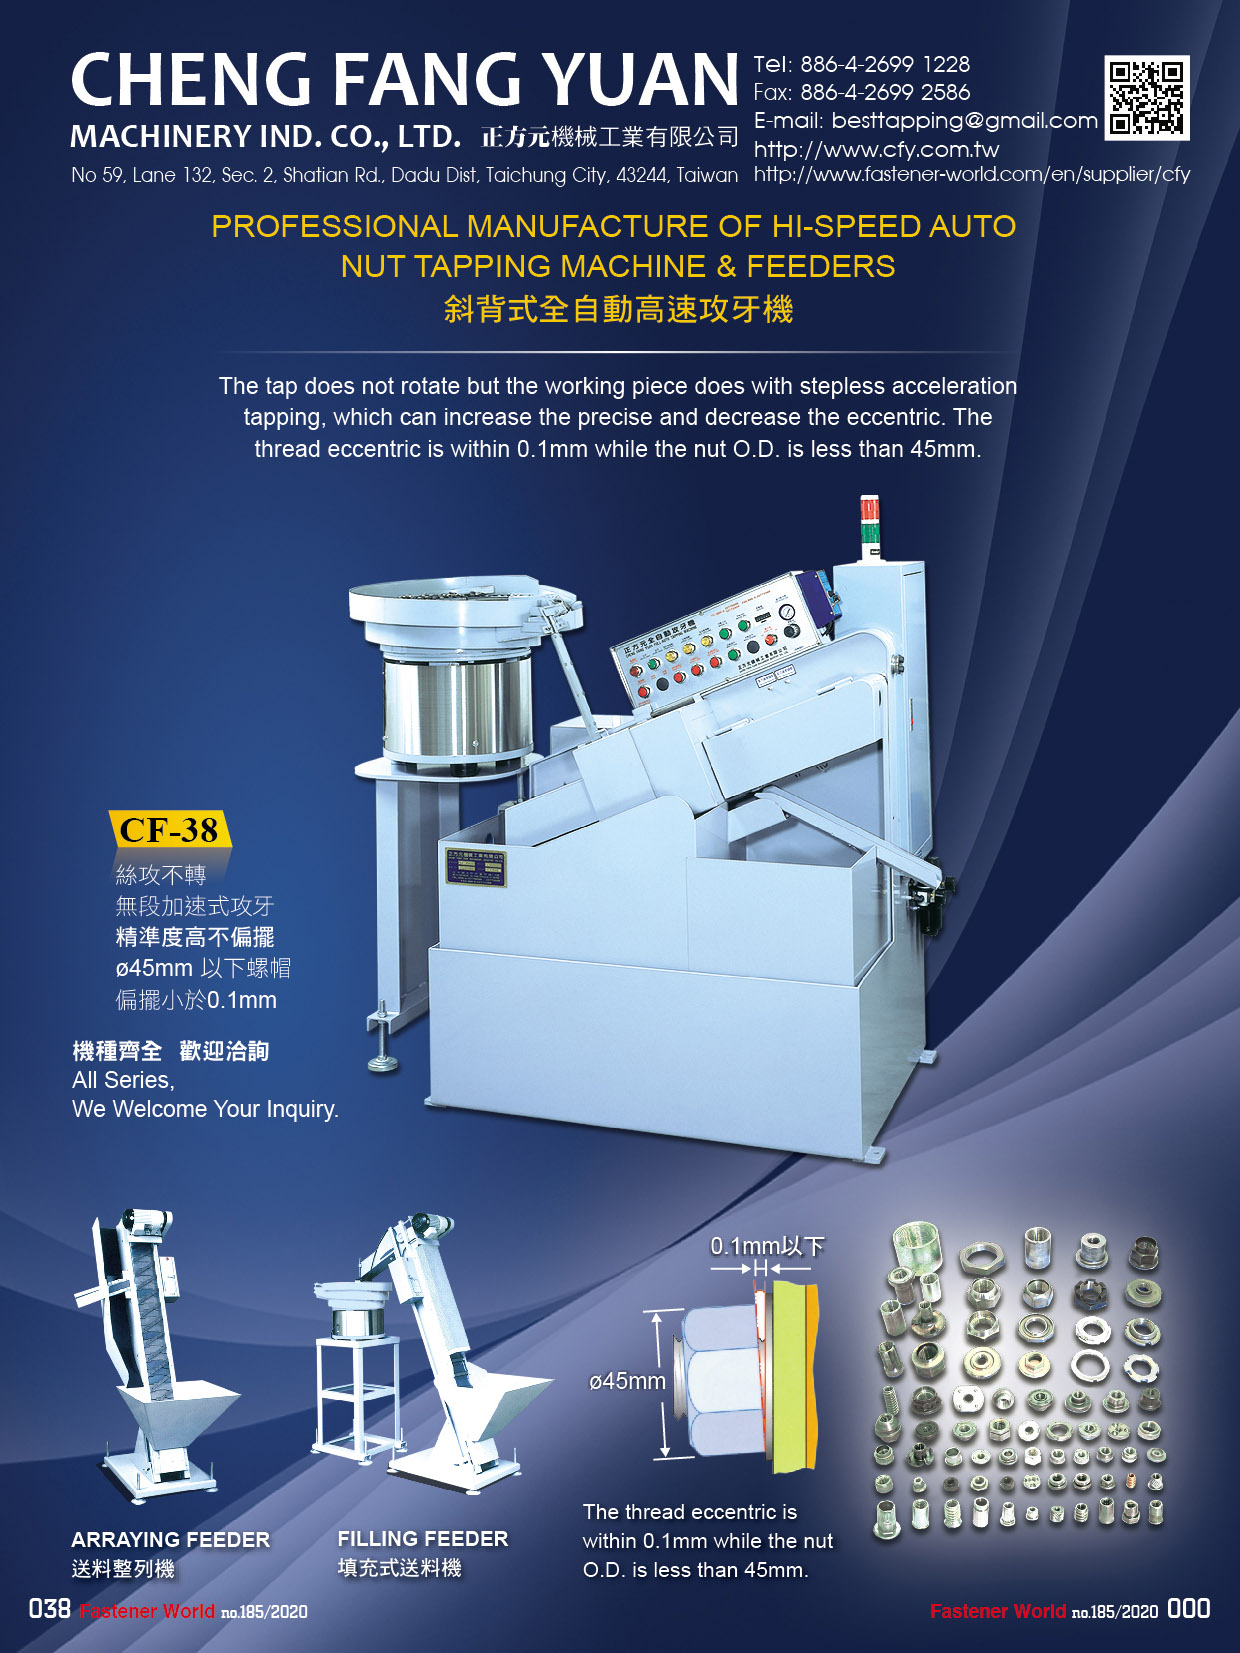 CHENG FANG YUAN MACHINERY INDUSTRIAL CO., LTD.  , HI-SPEED AUTO THREAD-TAPPING MACHINE,AUTO THREAD TAPPING MACHINE,GLOBE ABRASIVE MACHINE,ARRAYING FEEDER,FILLING FEEDER,BALL FILLING FEEDER,NUT CLEANING MACHINER